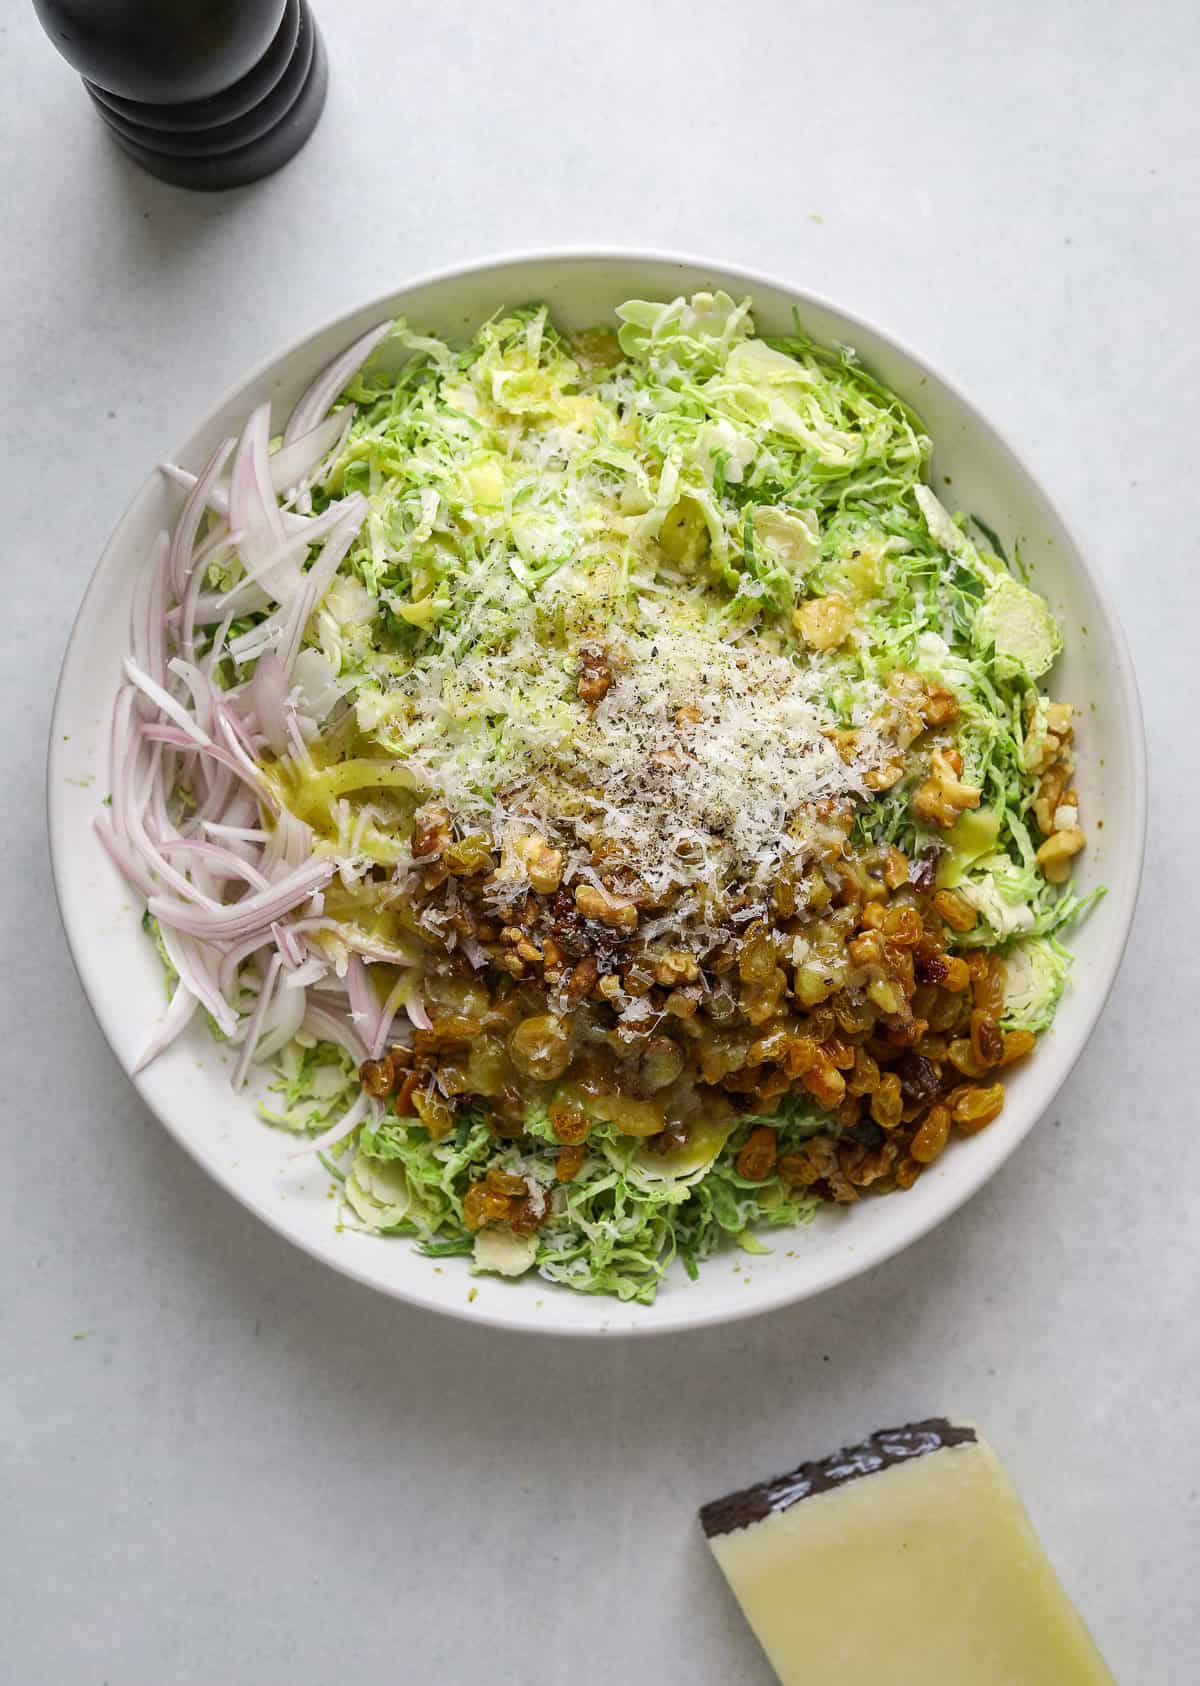 A bed of thinly sliced brussels sprouts topped with golden raisins, sliced shallots and cheese.